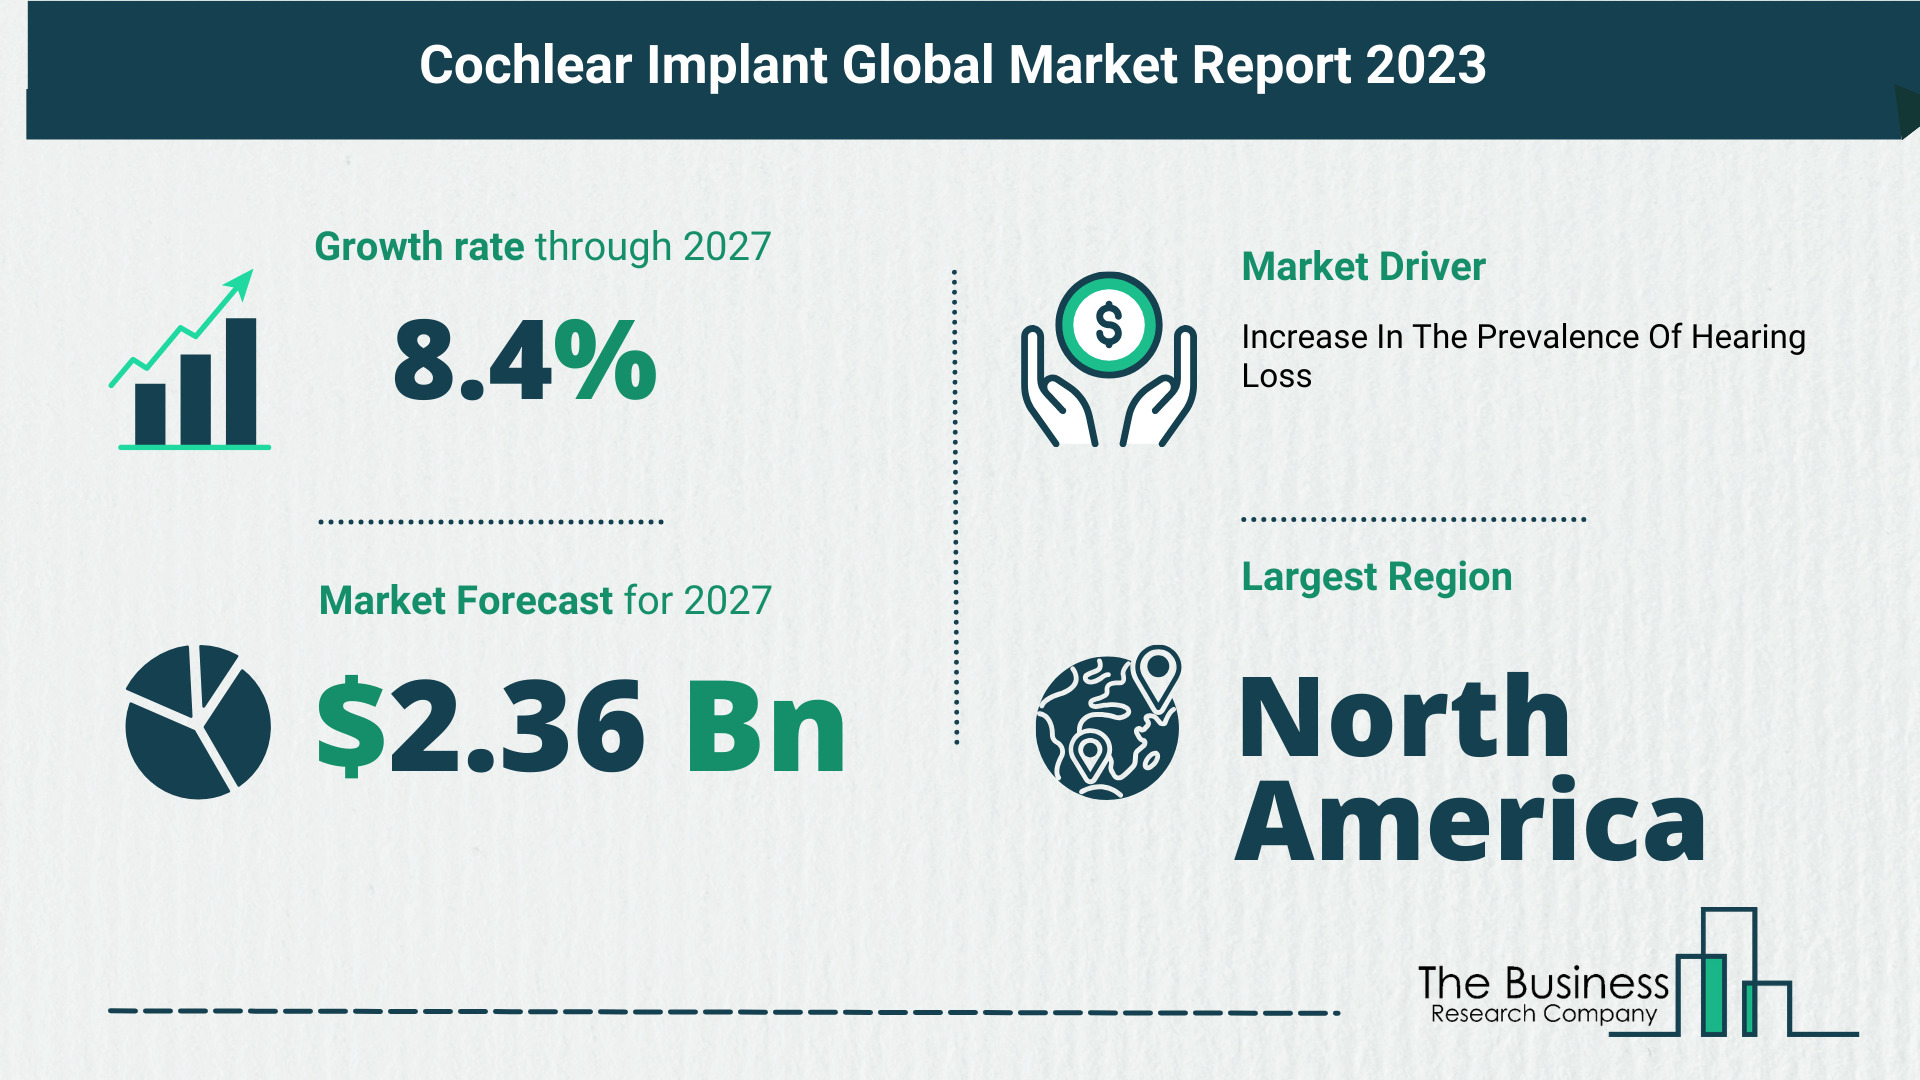 Key Takeaways From The Global Cochlear Implant Market Forecast 2023